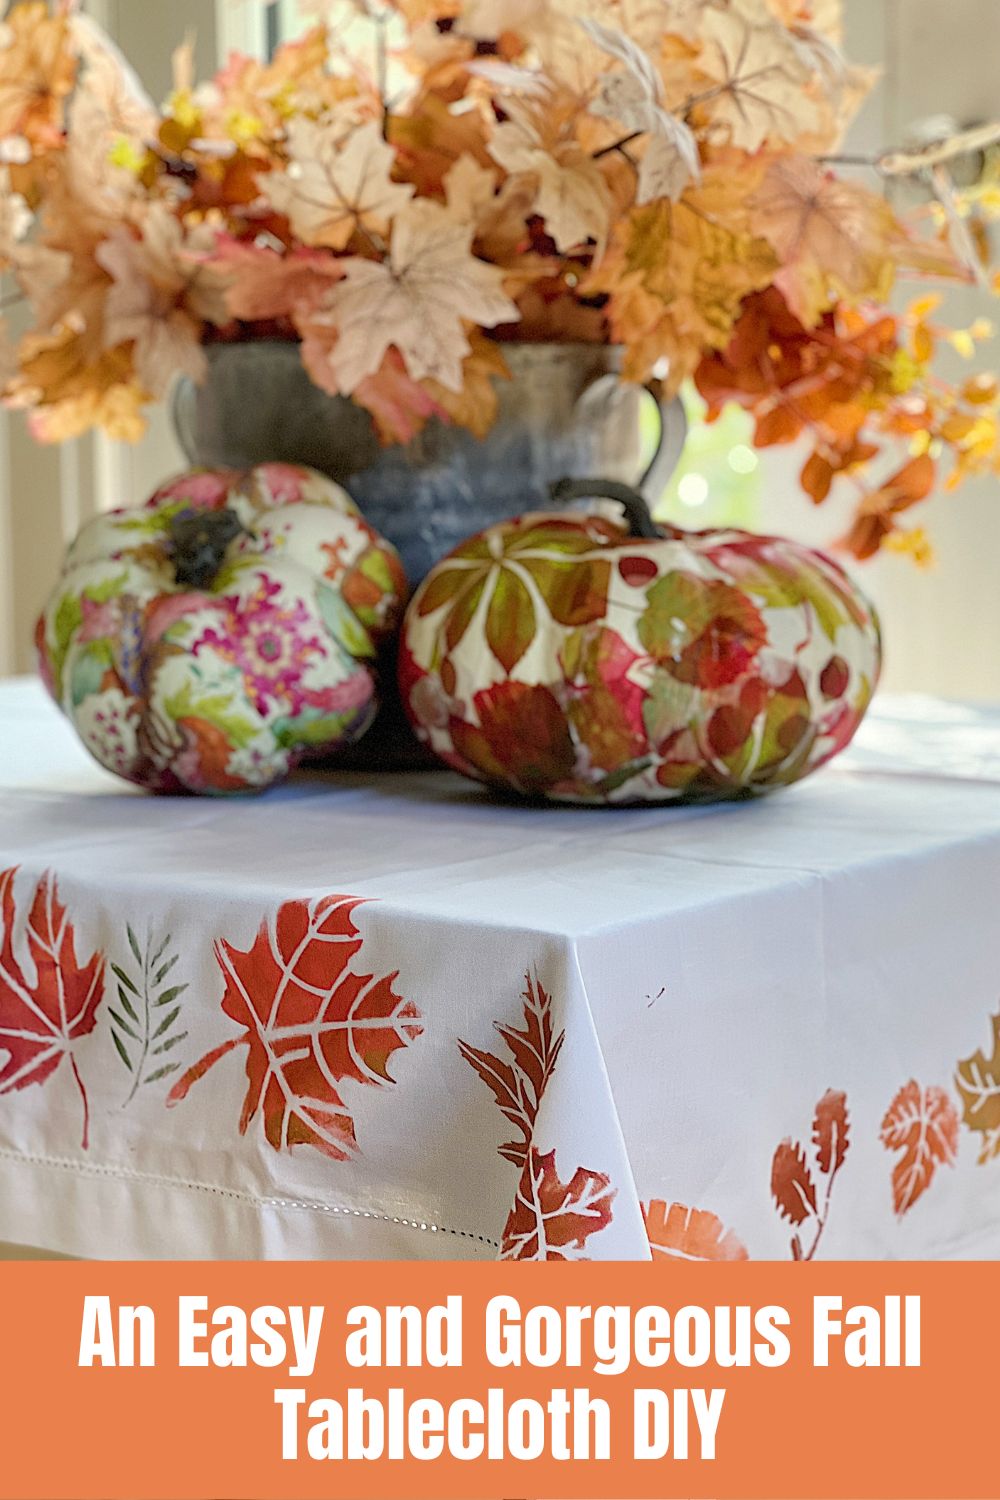 I have never made a fall tablecloth and decided to make one using stencils and metallic paint. I am so happy with how this turned out!